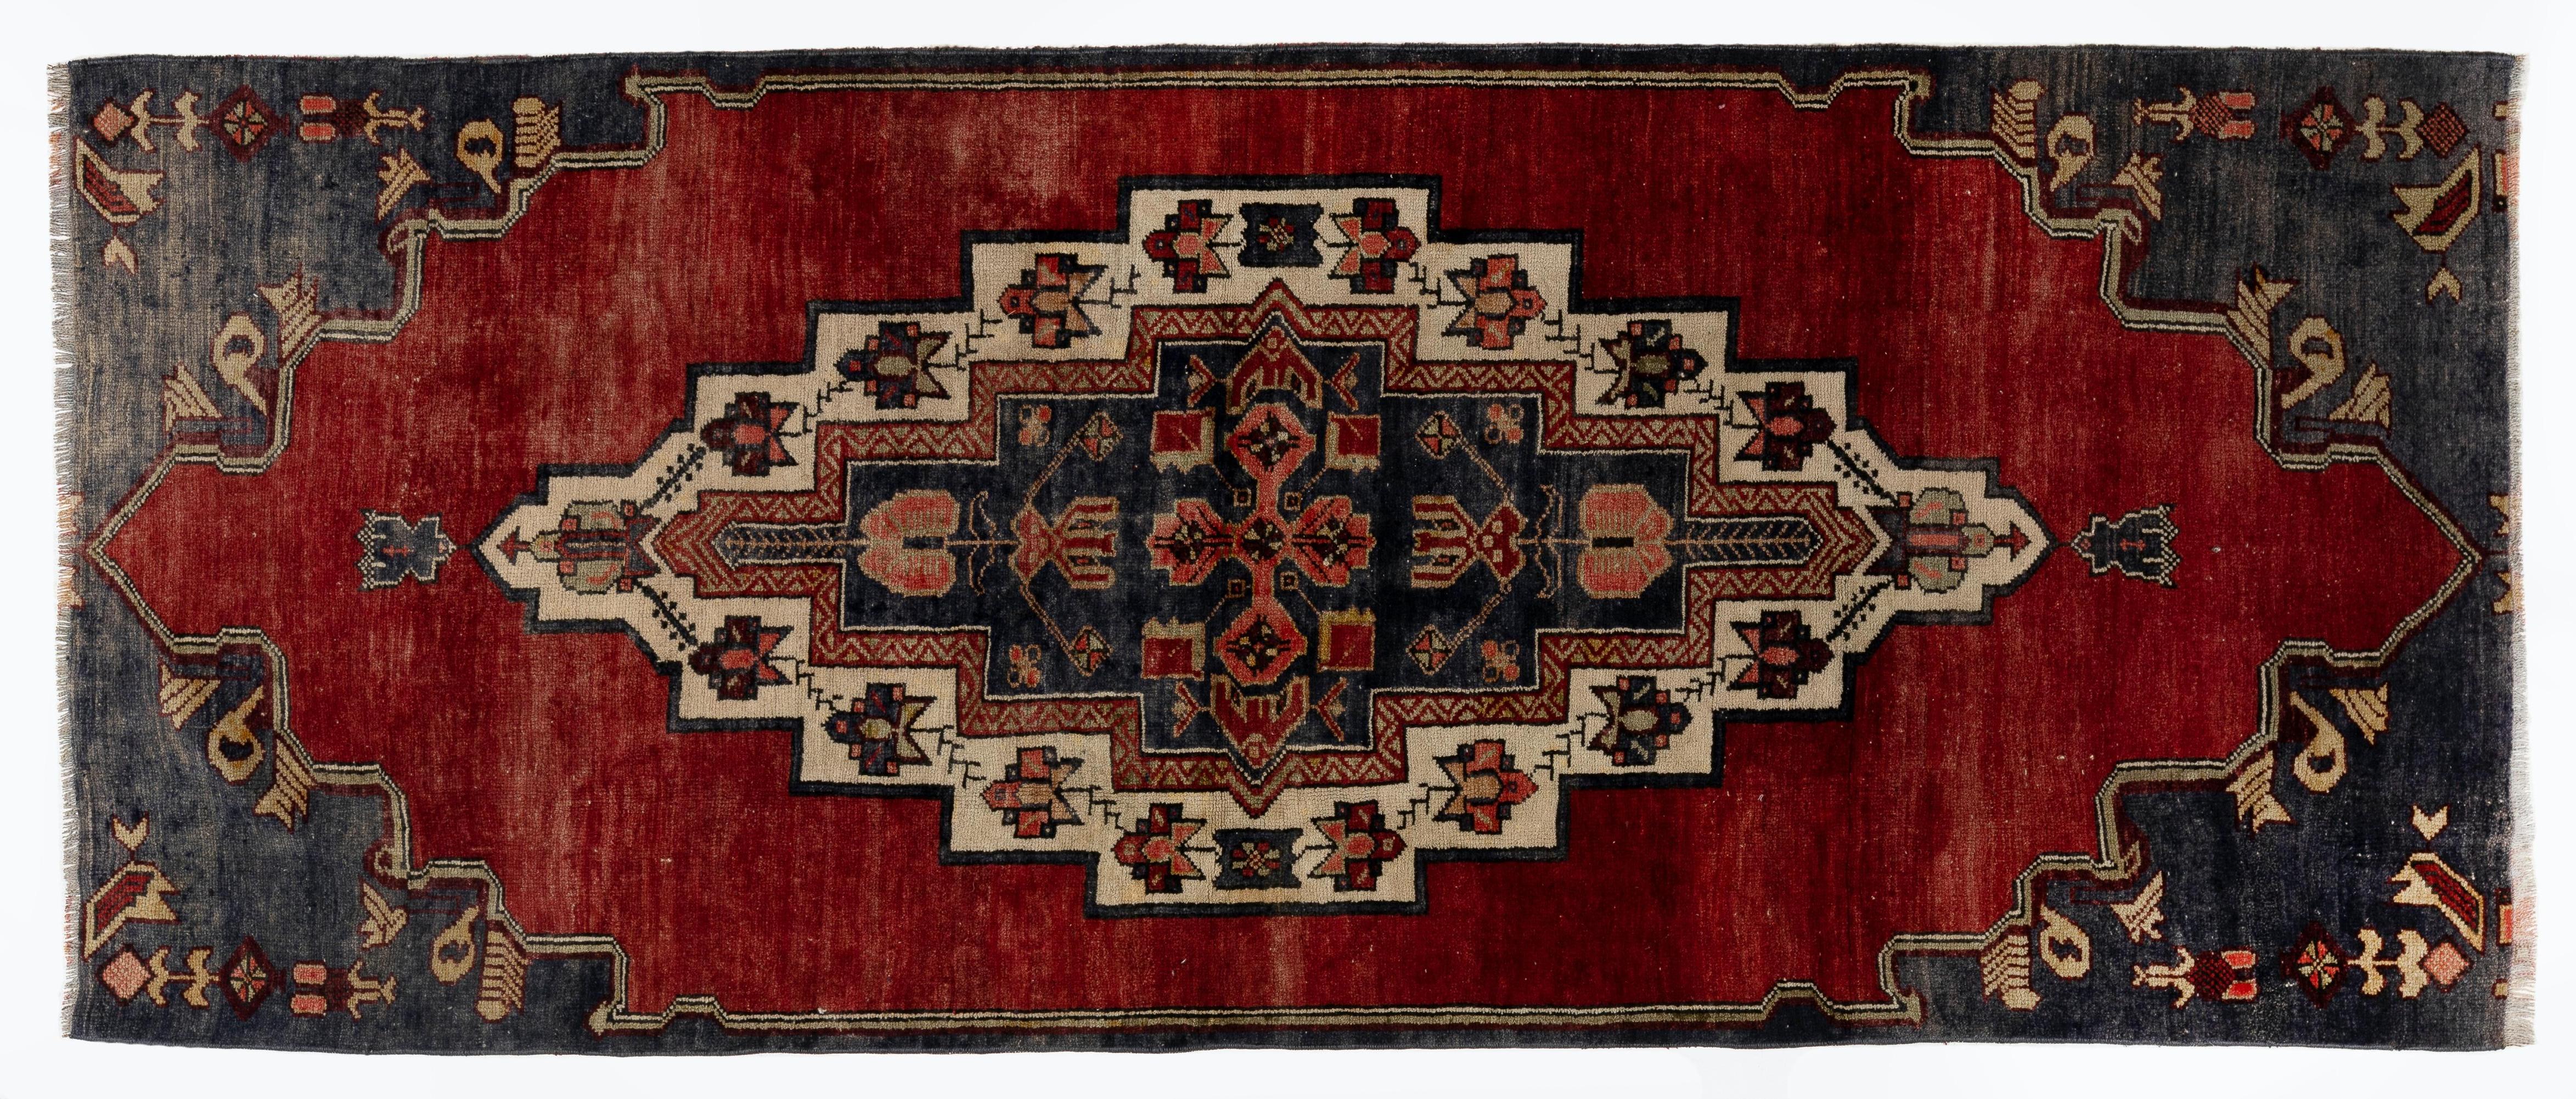 20th Century 3.8x9 Ft Vintage Hand-Knotted Turkish Rug in Red and Dark Navy Color, circa 1960 For Sale